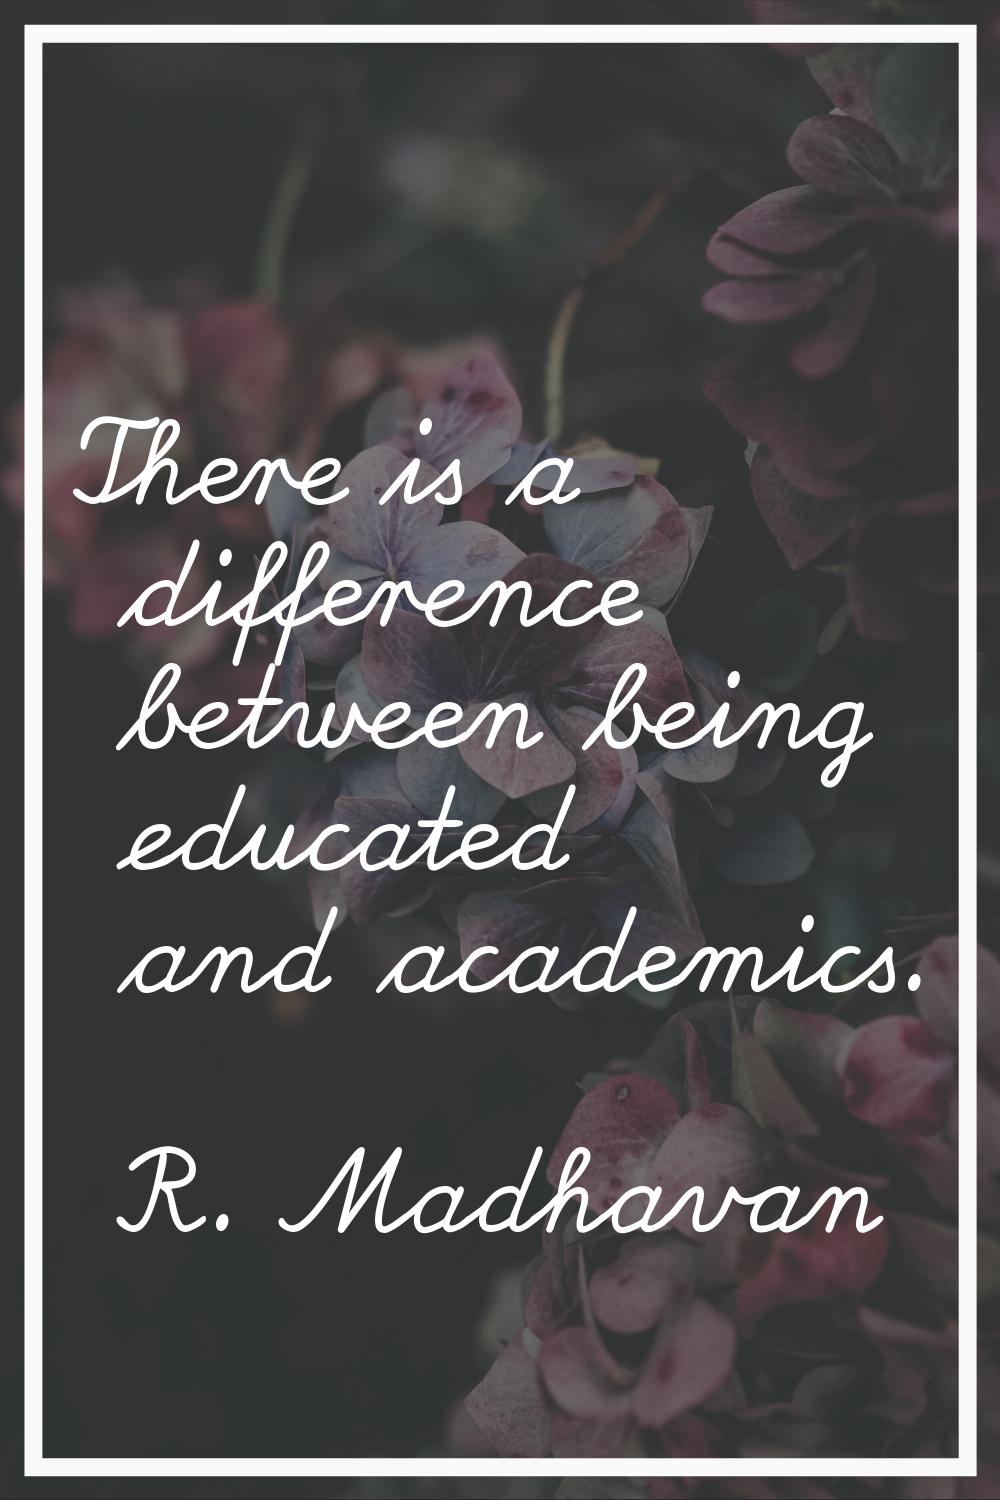 There is a difference between being educated and academics.